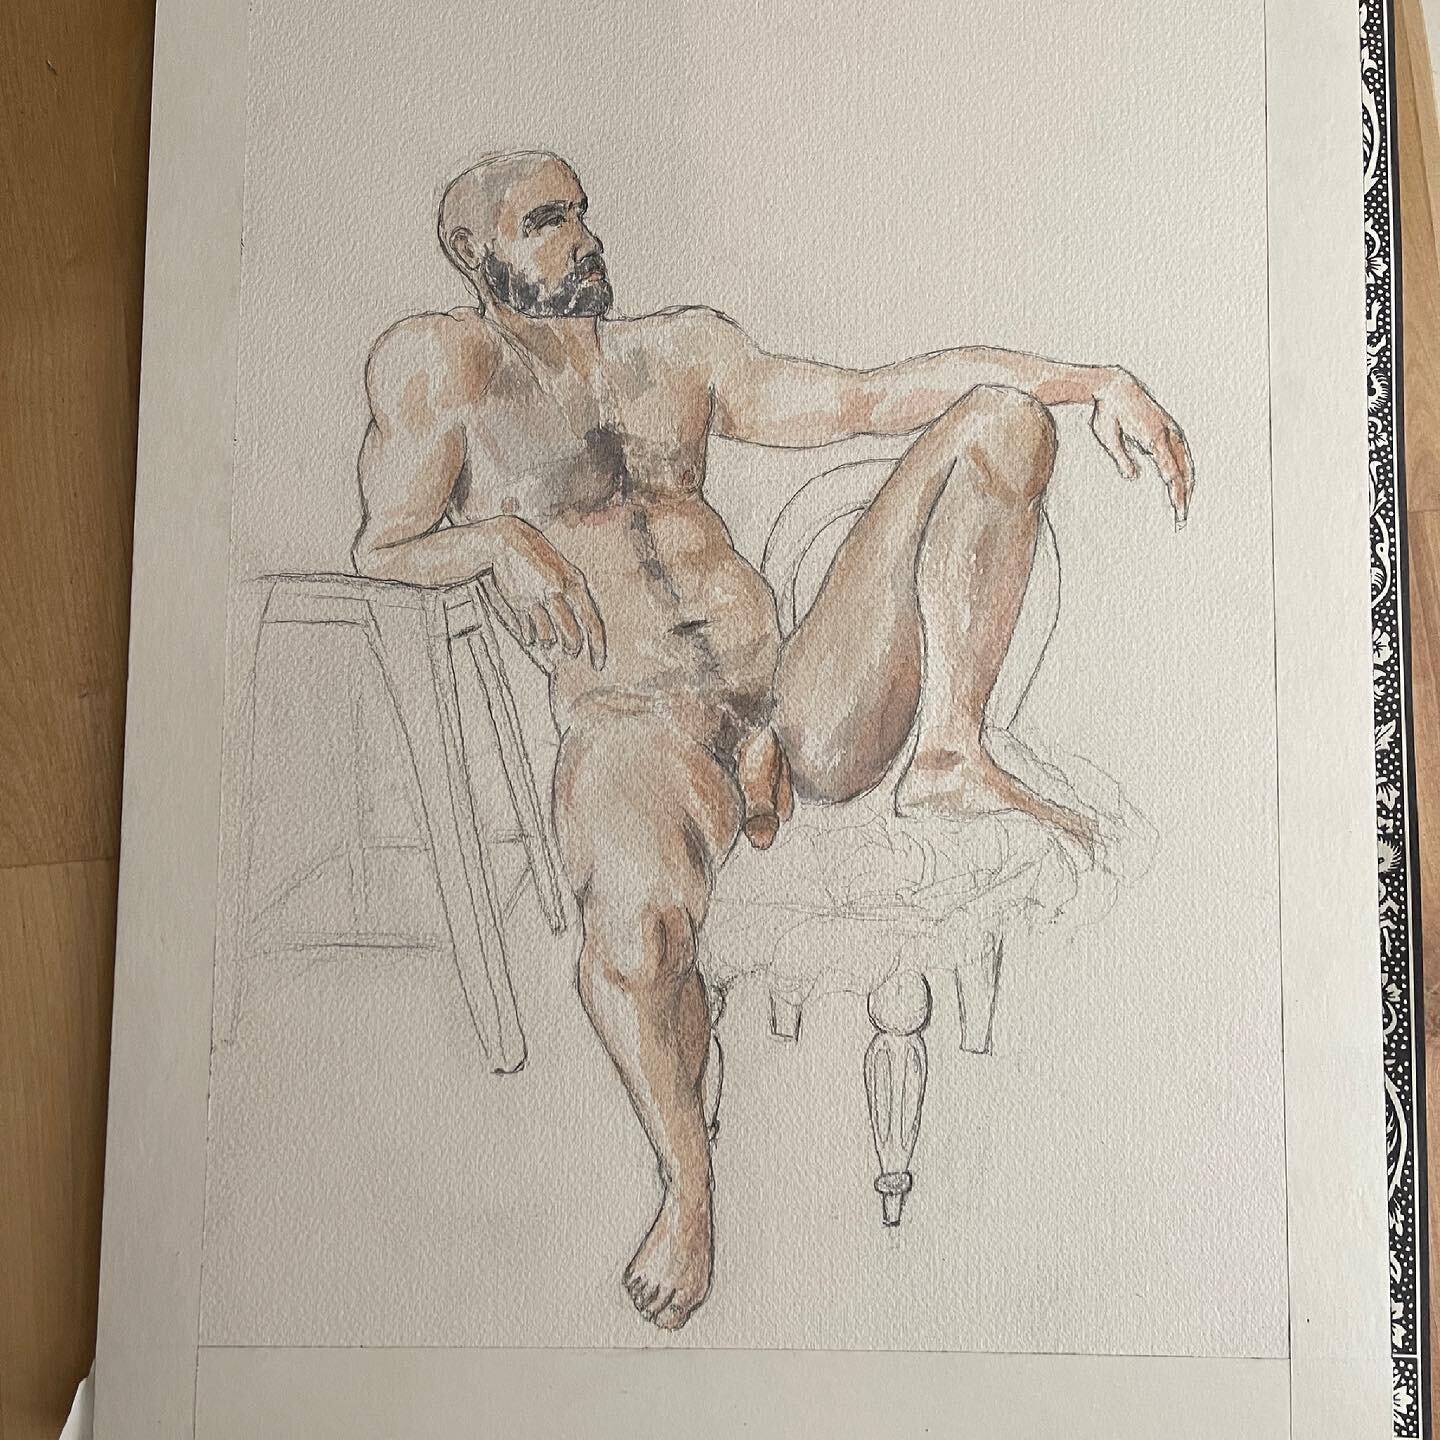 Very fun long pose from @thatzaddyzick with @thamesmeadlifedrawing . 

#lifedrawing #figuredrawing #figurepainting #watercolor #queerart #queerartist